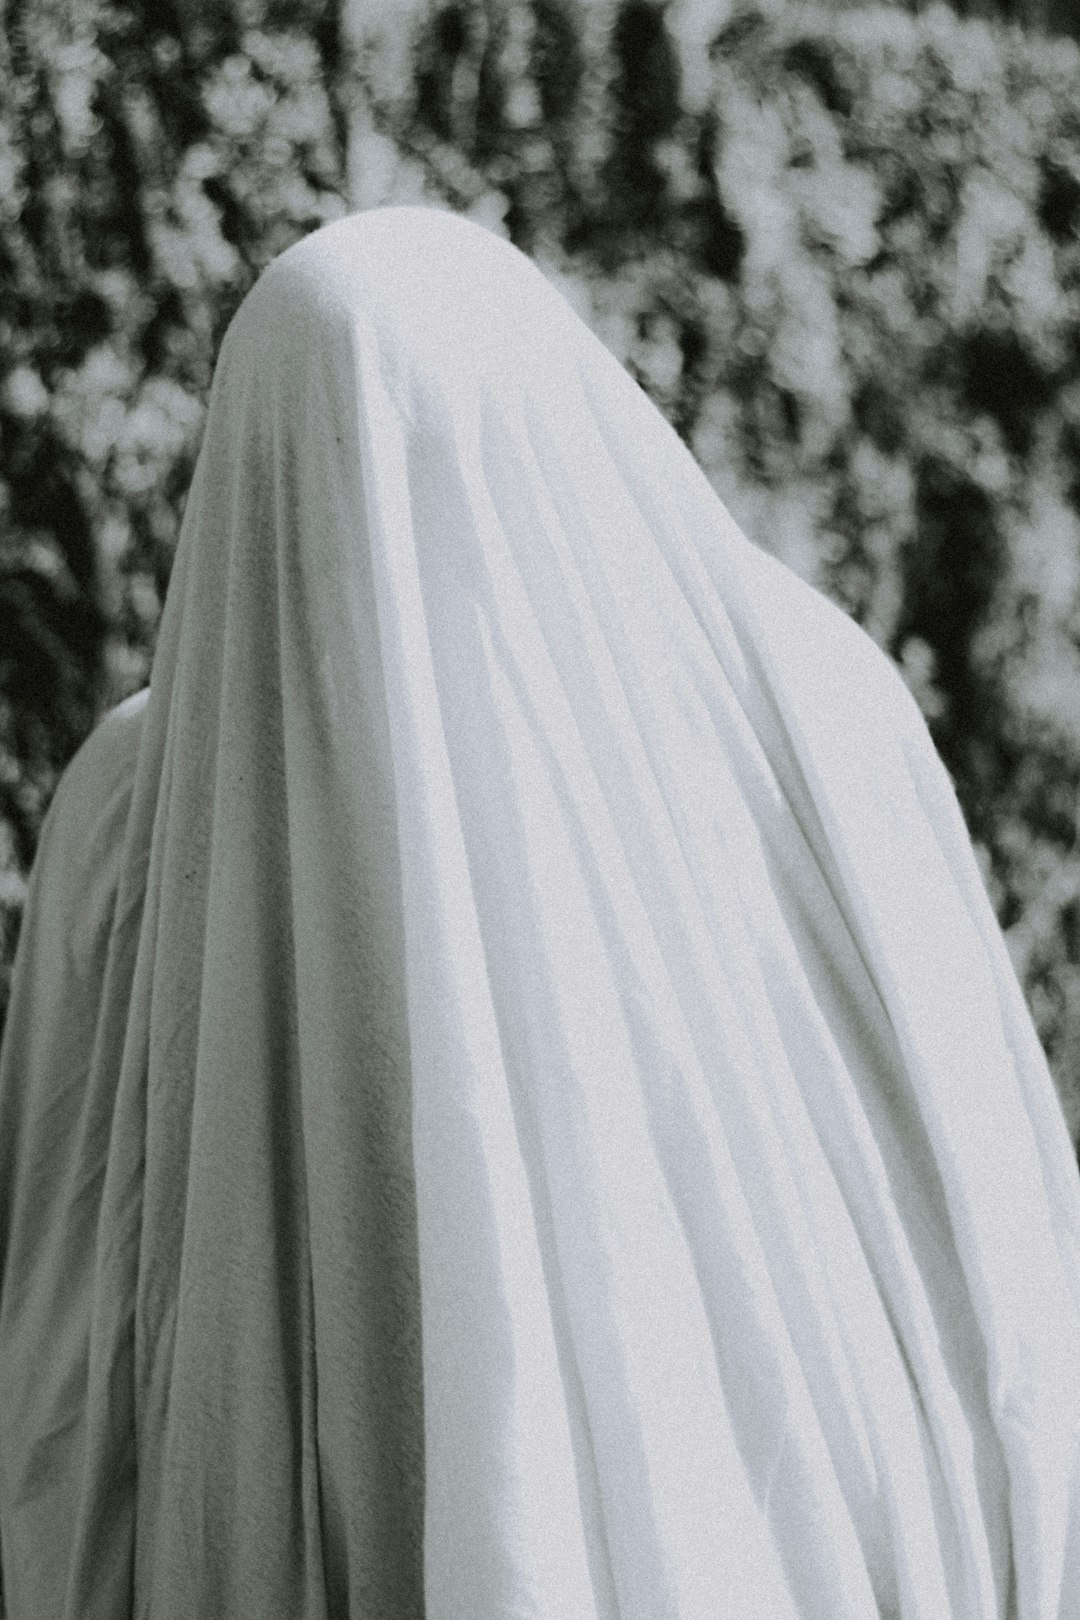 person in white hijab standing near trees